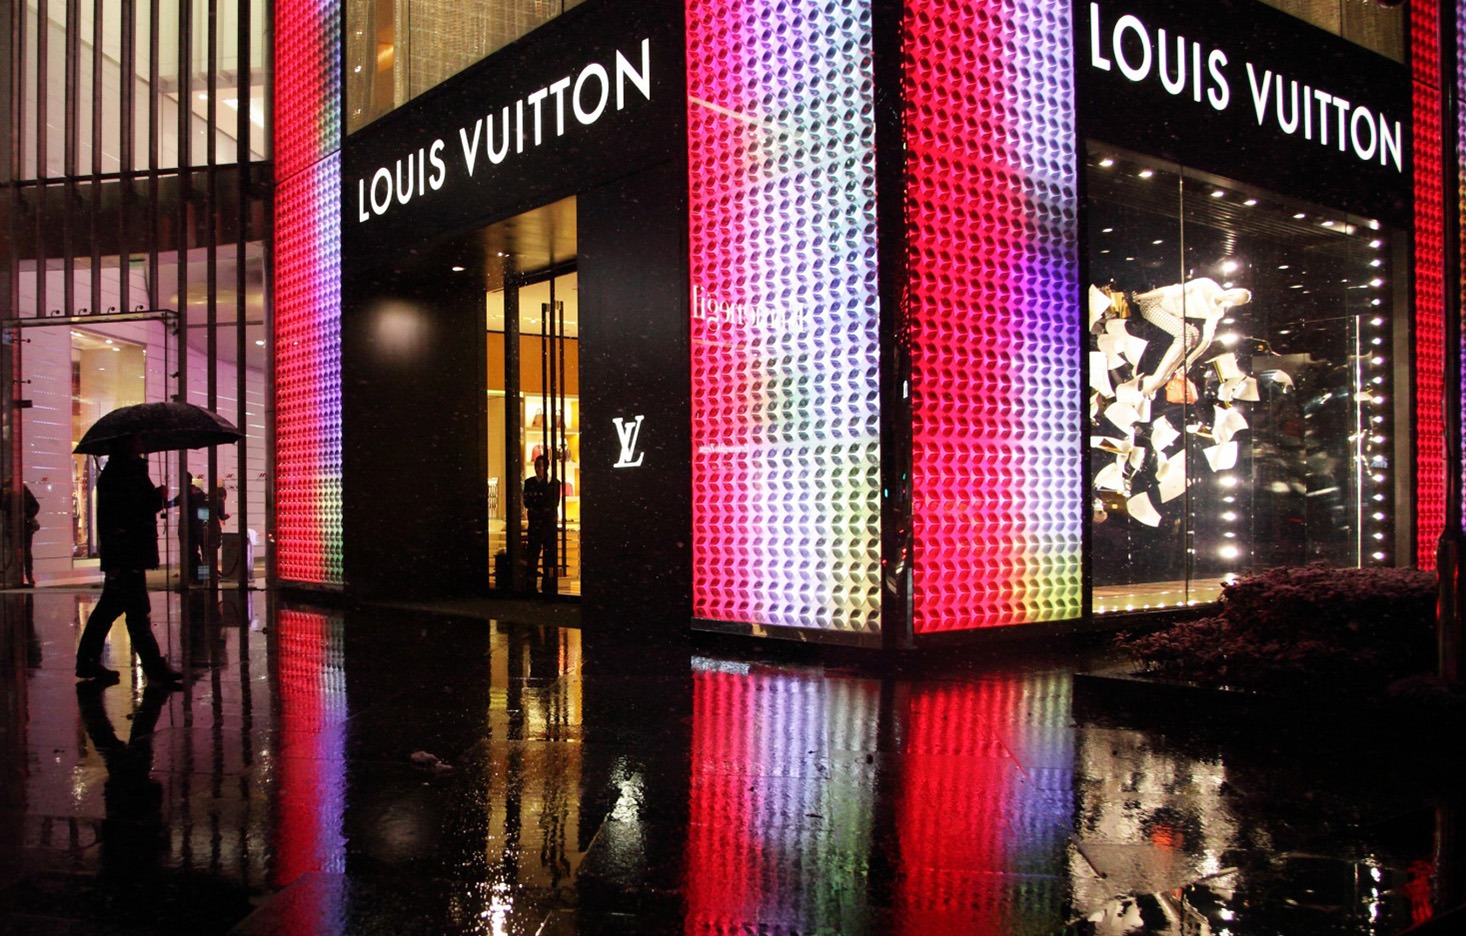 Louis Vuitton’s fragrance will have a hint of that exquisite new handbag smell